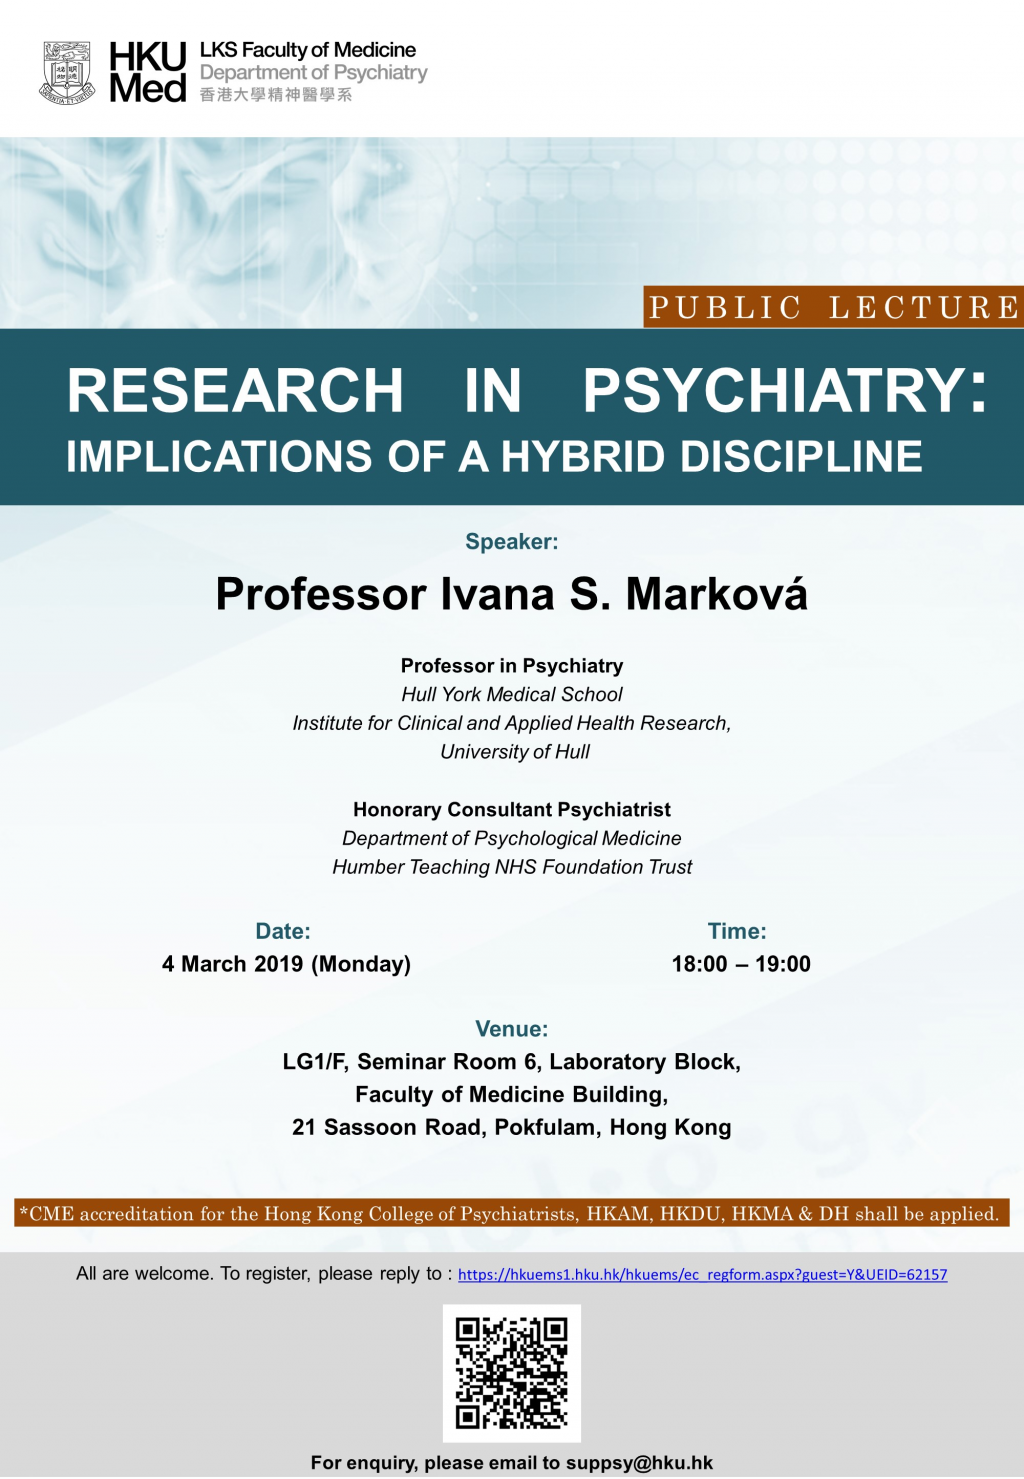 Public Lecture: Research in Psychiatry